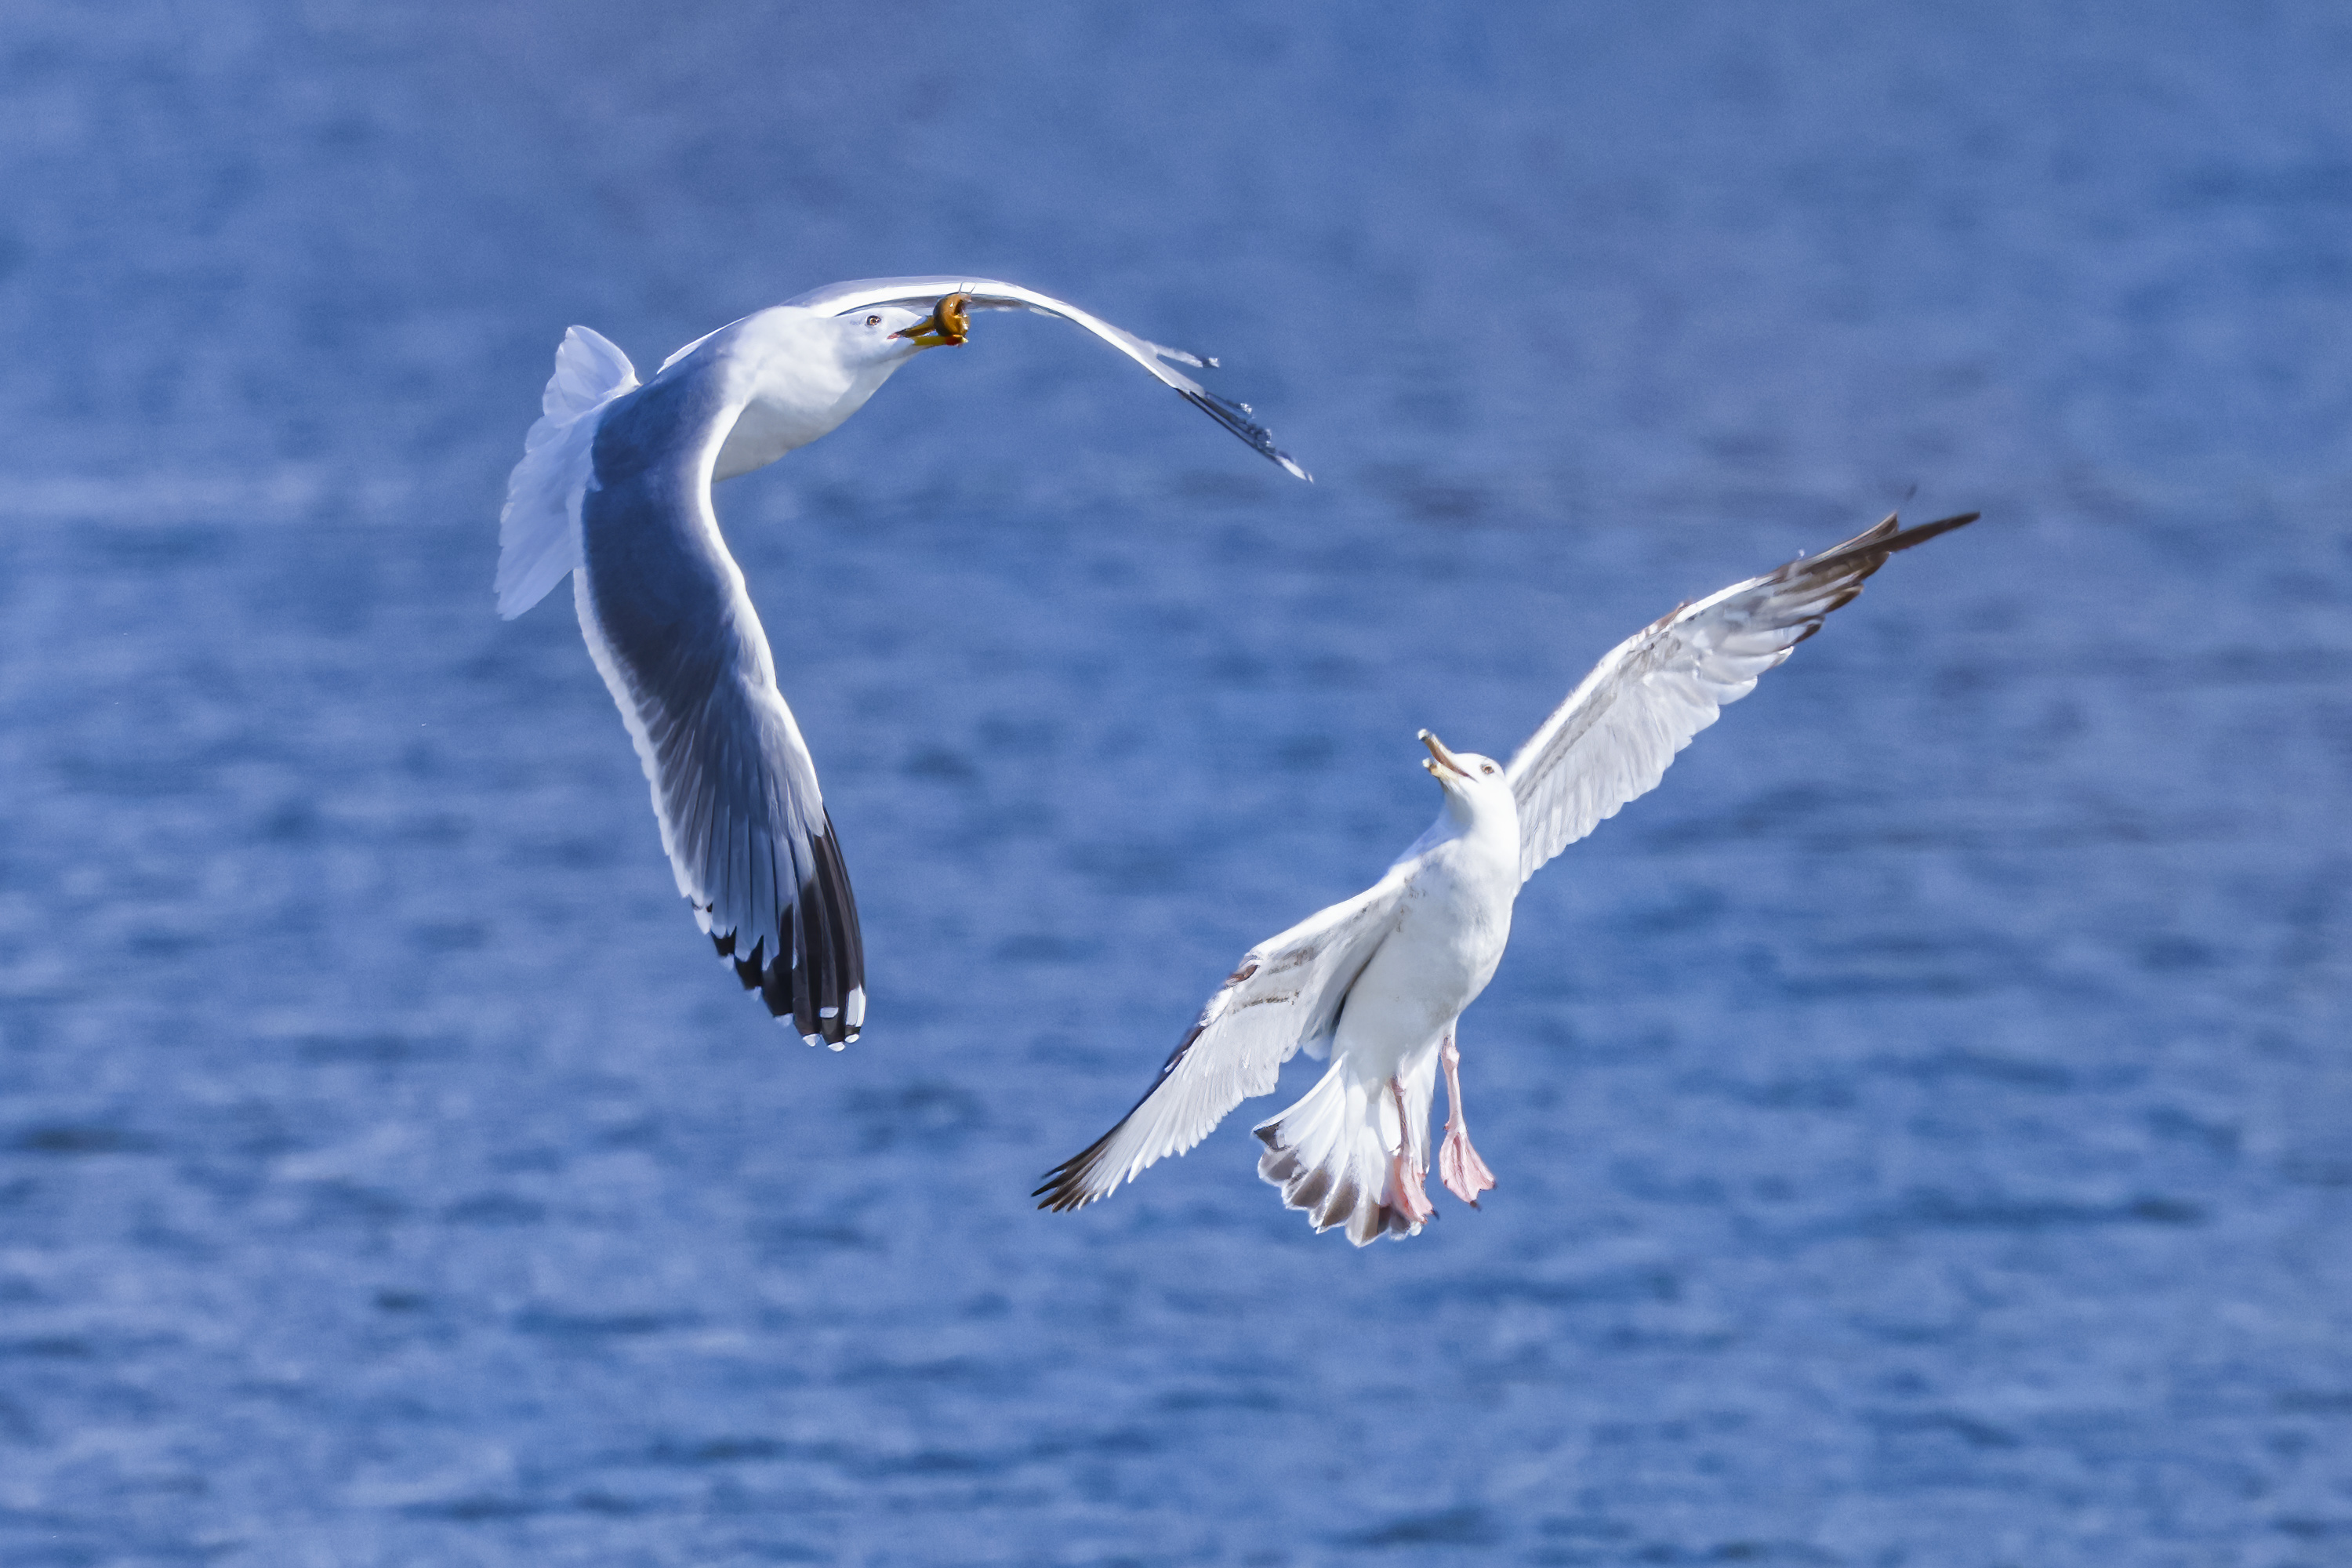 Two gulls present a dramatic scene with a new catch in one's beak above the Hunhe River in Shenyang, northeast China's Liaoning Province on March 20, 2024. /IC